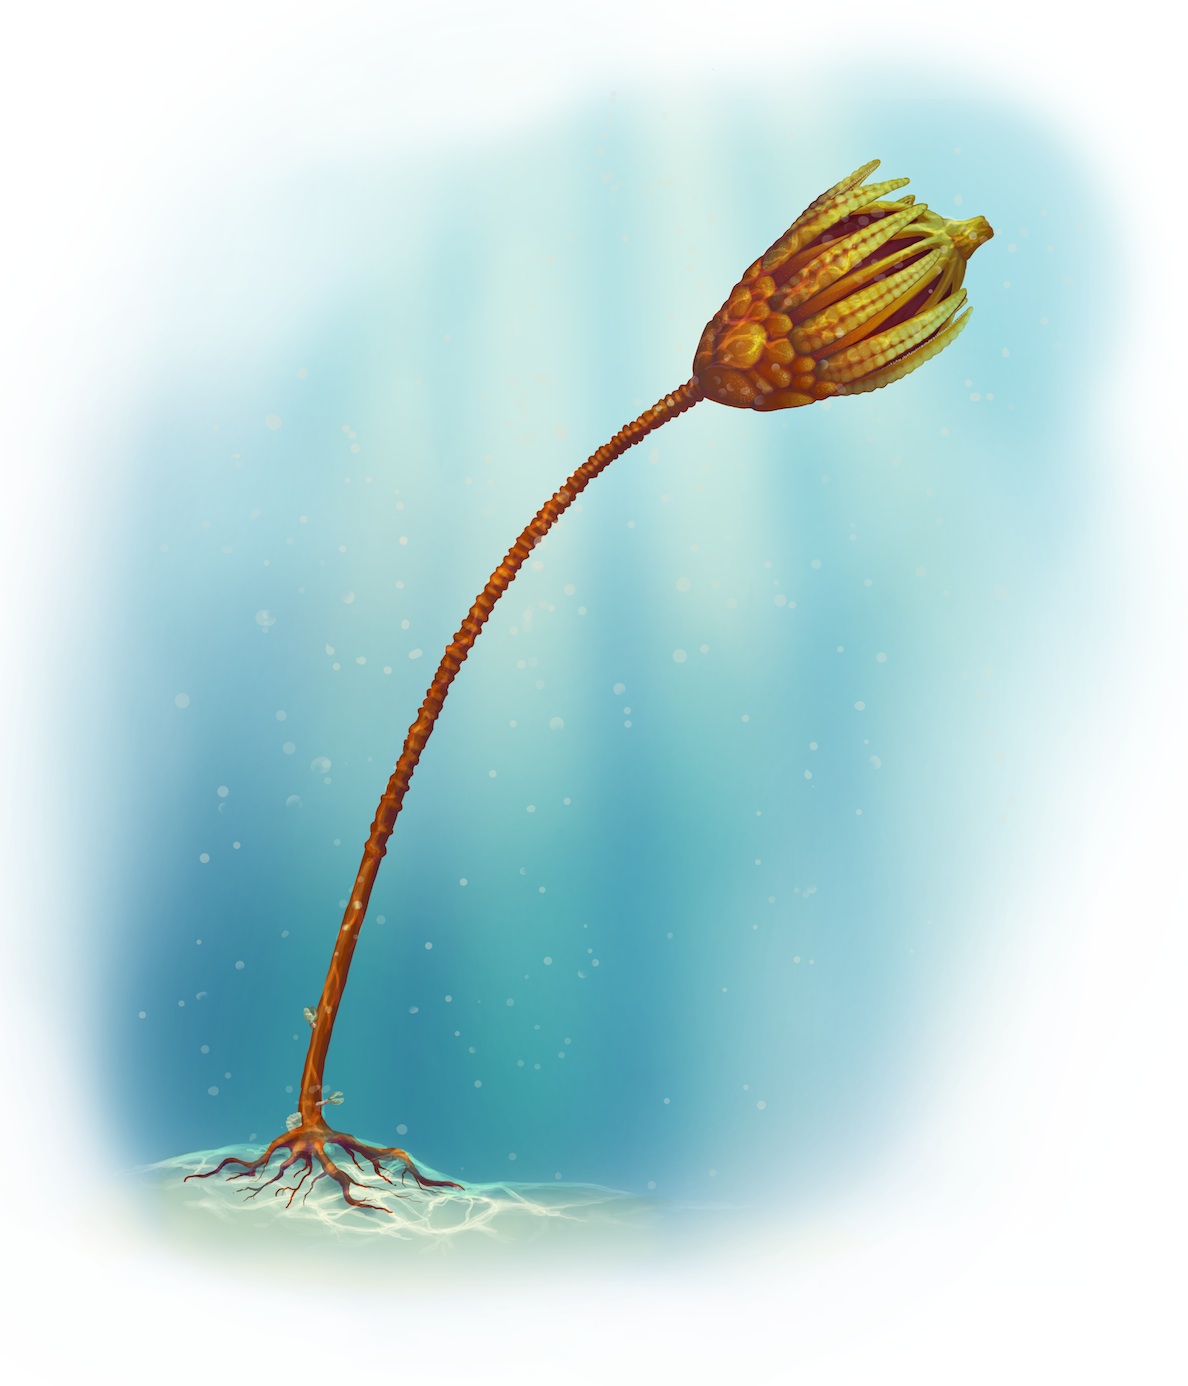 An Illustration by Mary Williams of a Silurian Eucalyptocrinites crinoid with holdfast and stem based on specimens of Eucalyptocrinites and other closely related species from the Chicago area and Waldron, Indiana.